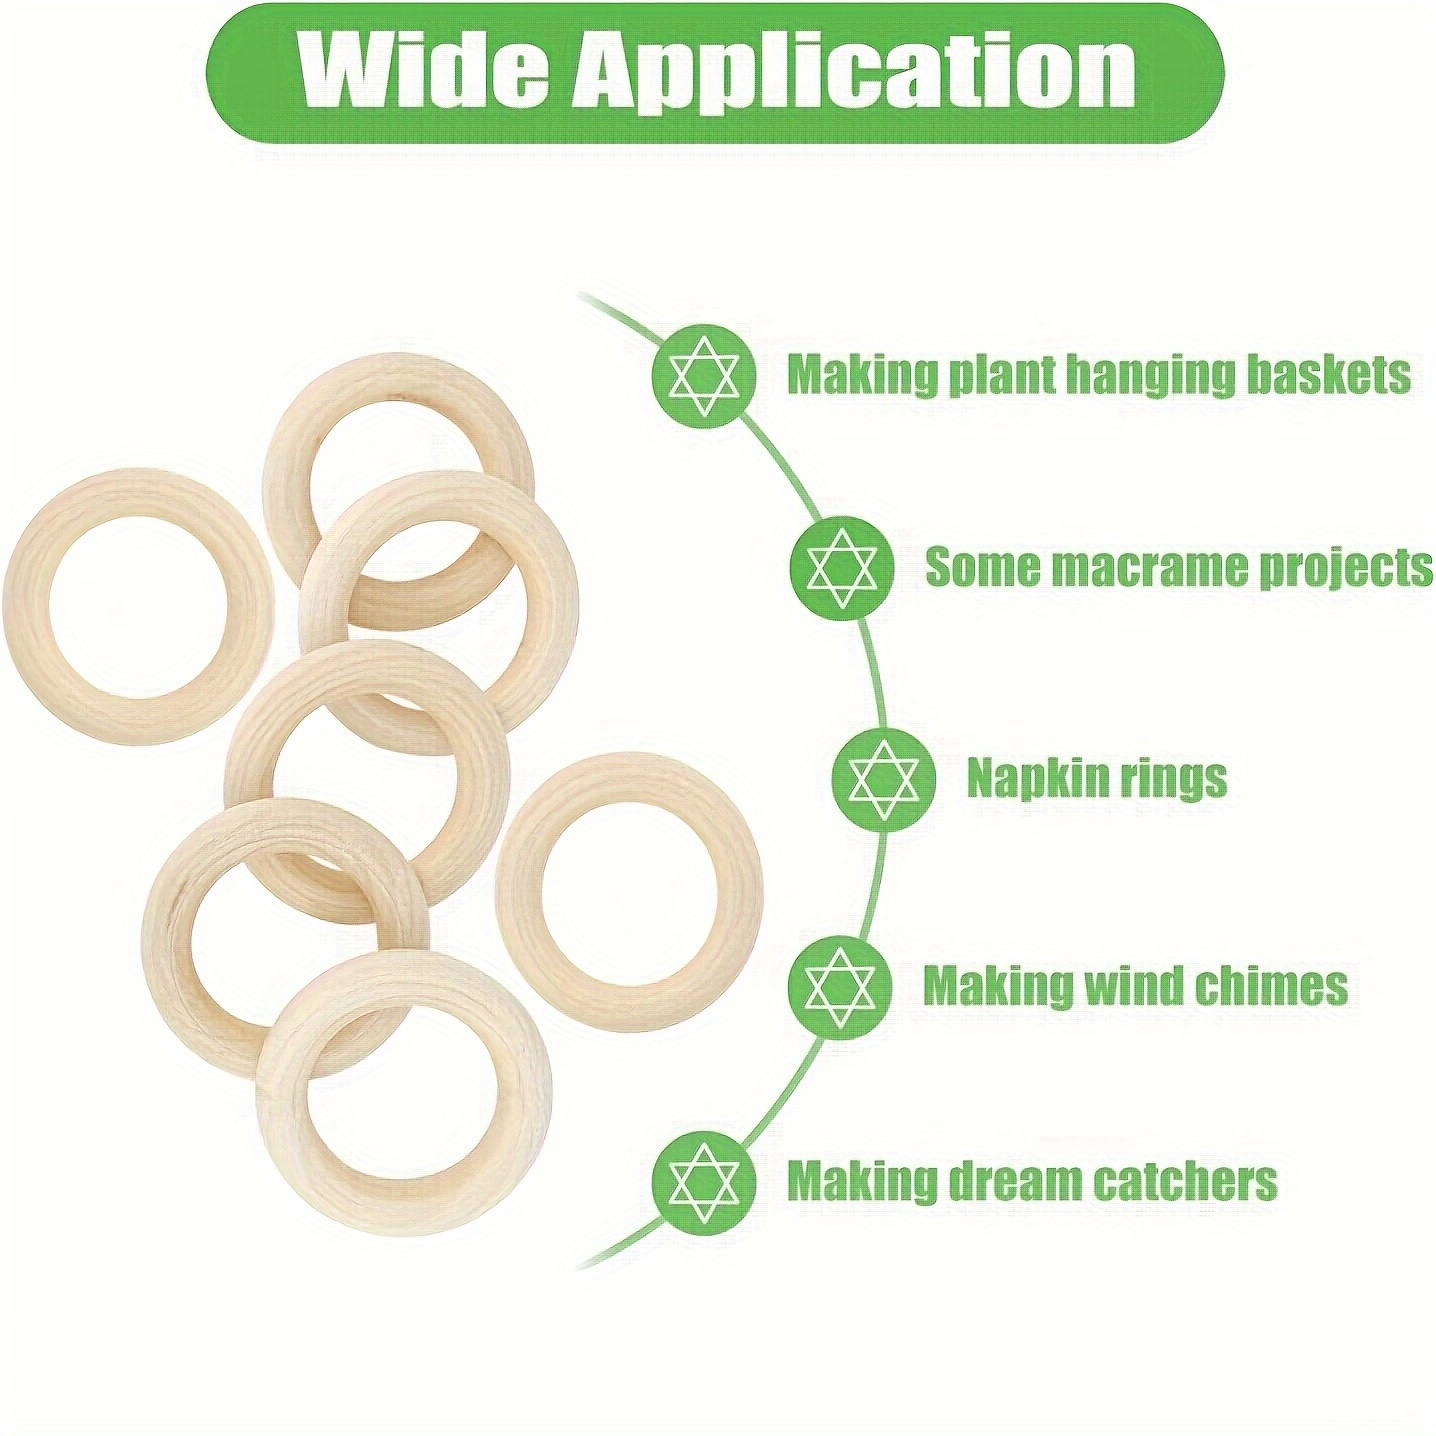 Wooden Rings for Crafts 30 PCS 55 mm Unfinished Wood Ring for Macrame Solid  Natural Wood Rings for DIY Craft Pendant Connectors Jewelry Making